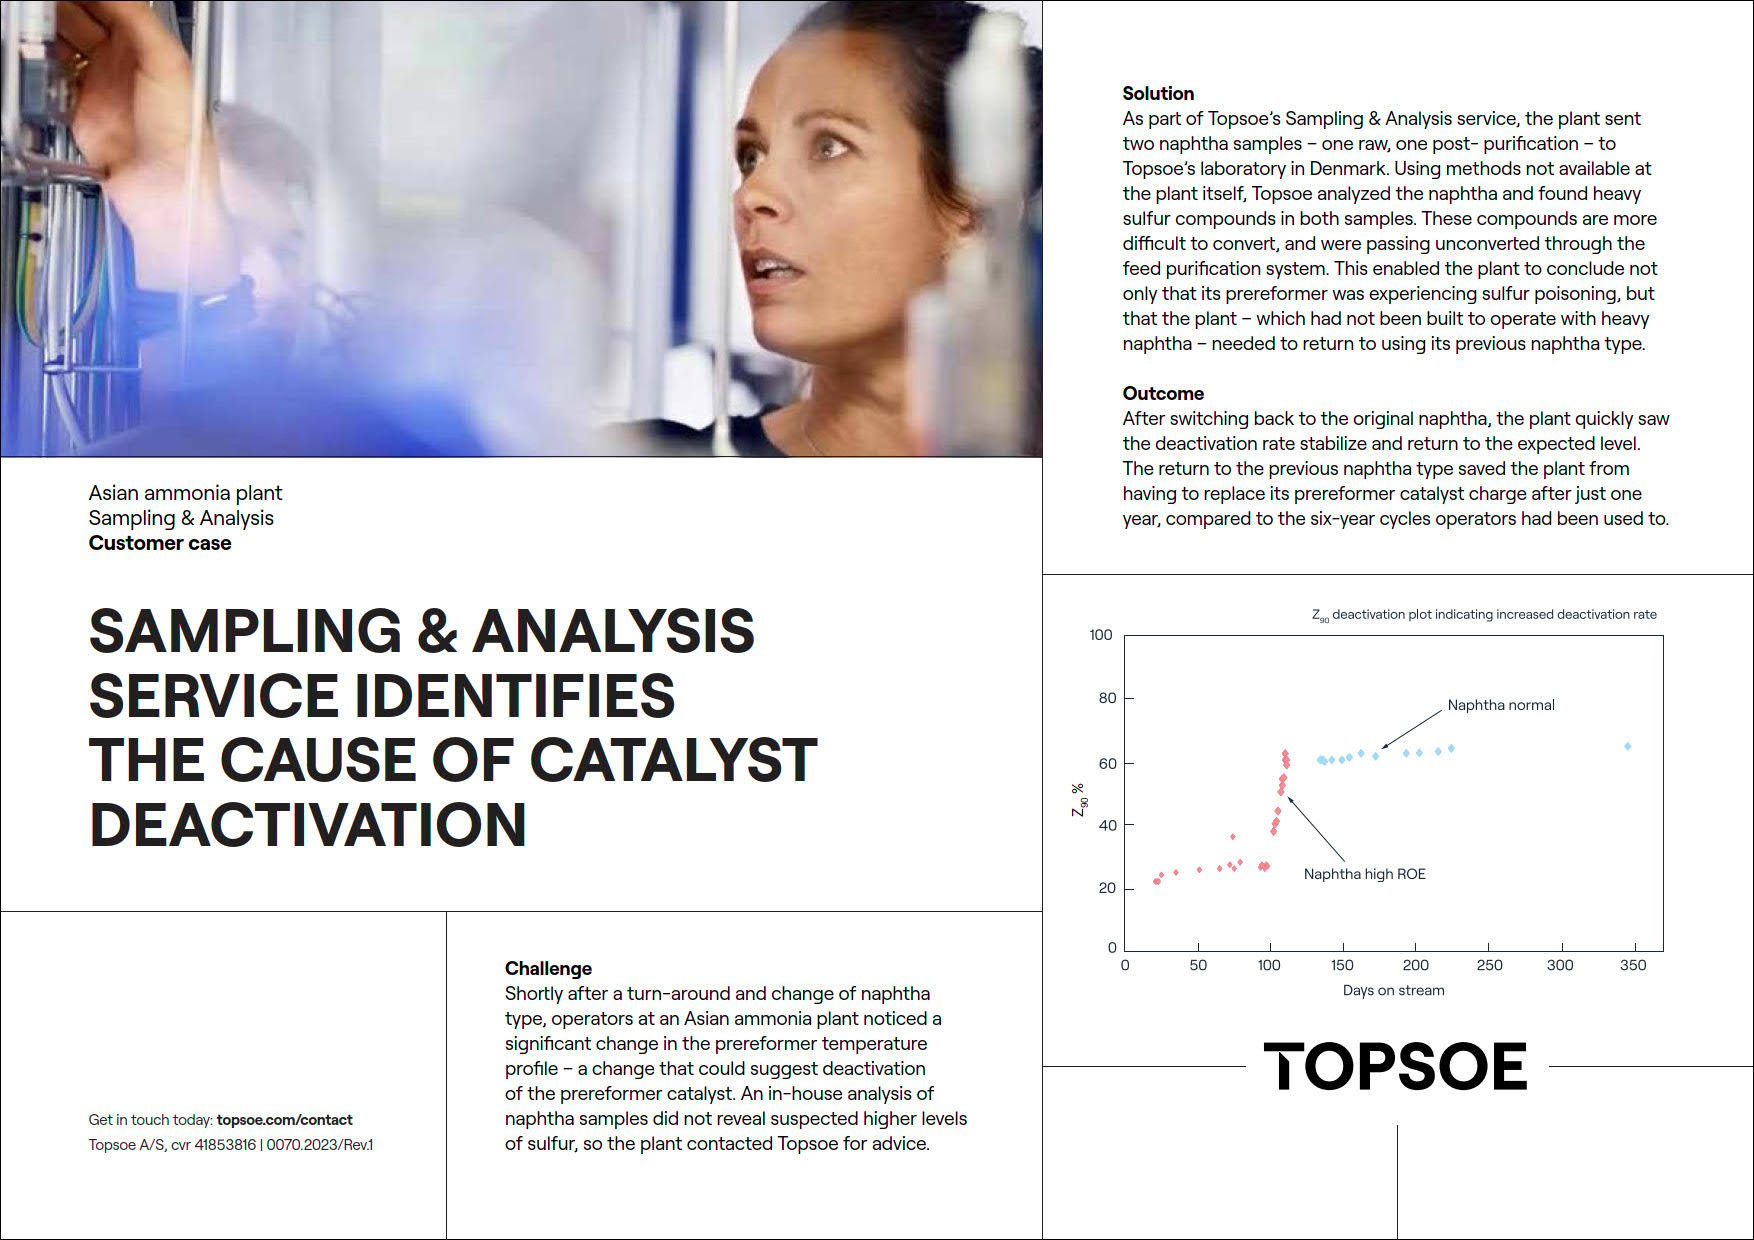 Sampling & Analysis Service Identifies the Cause of Catalyst Deactivation